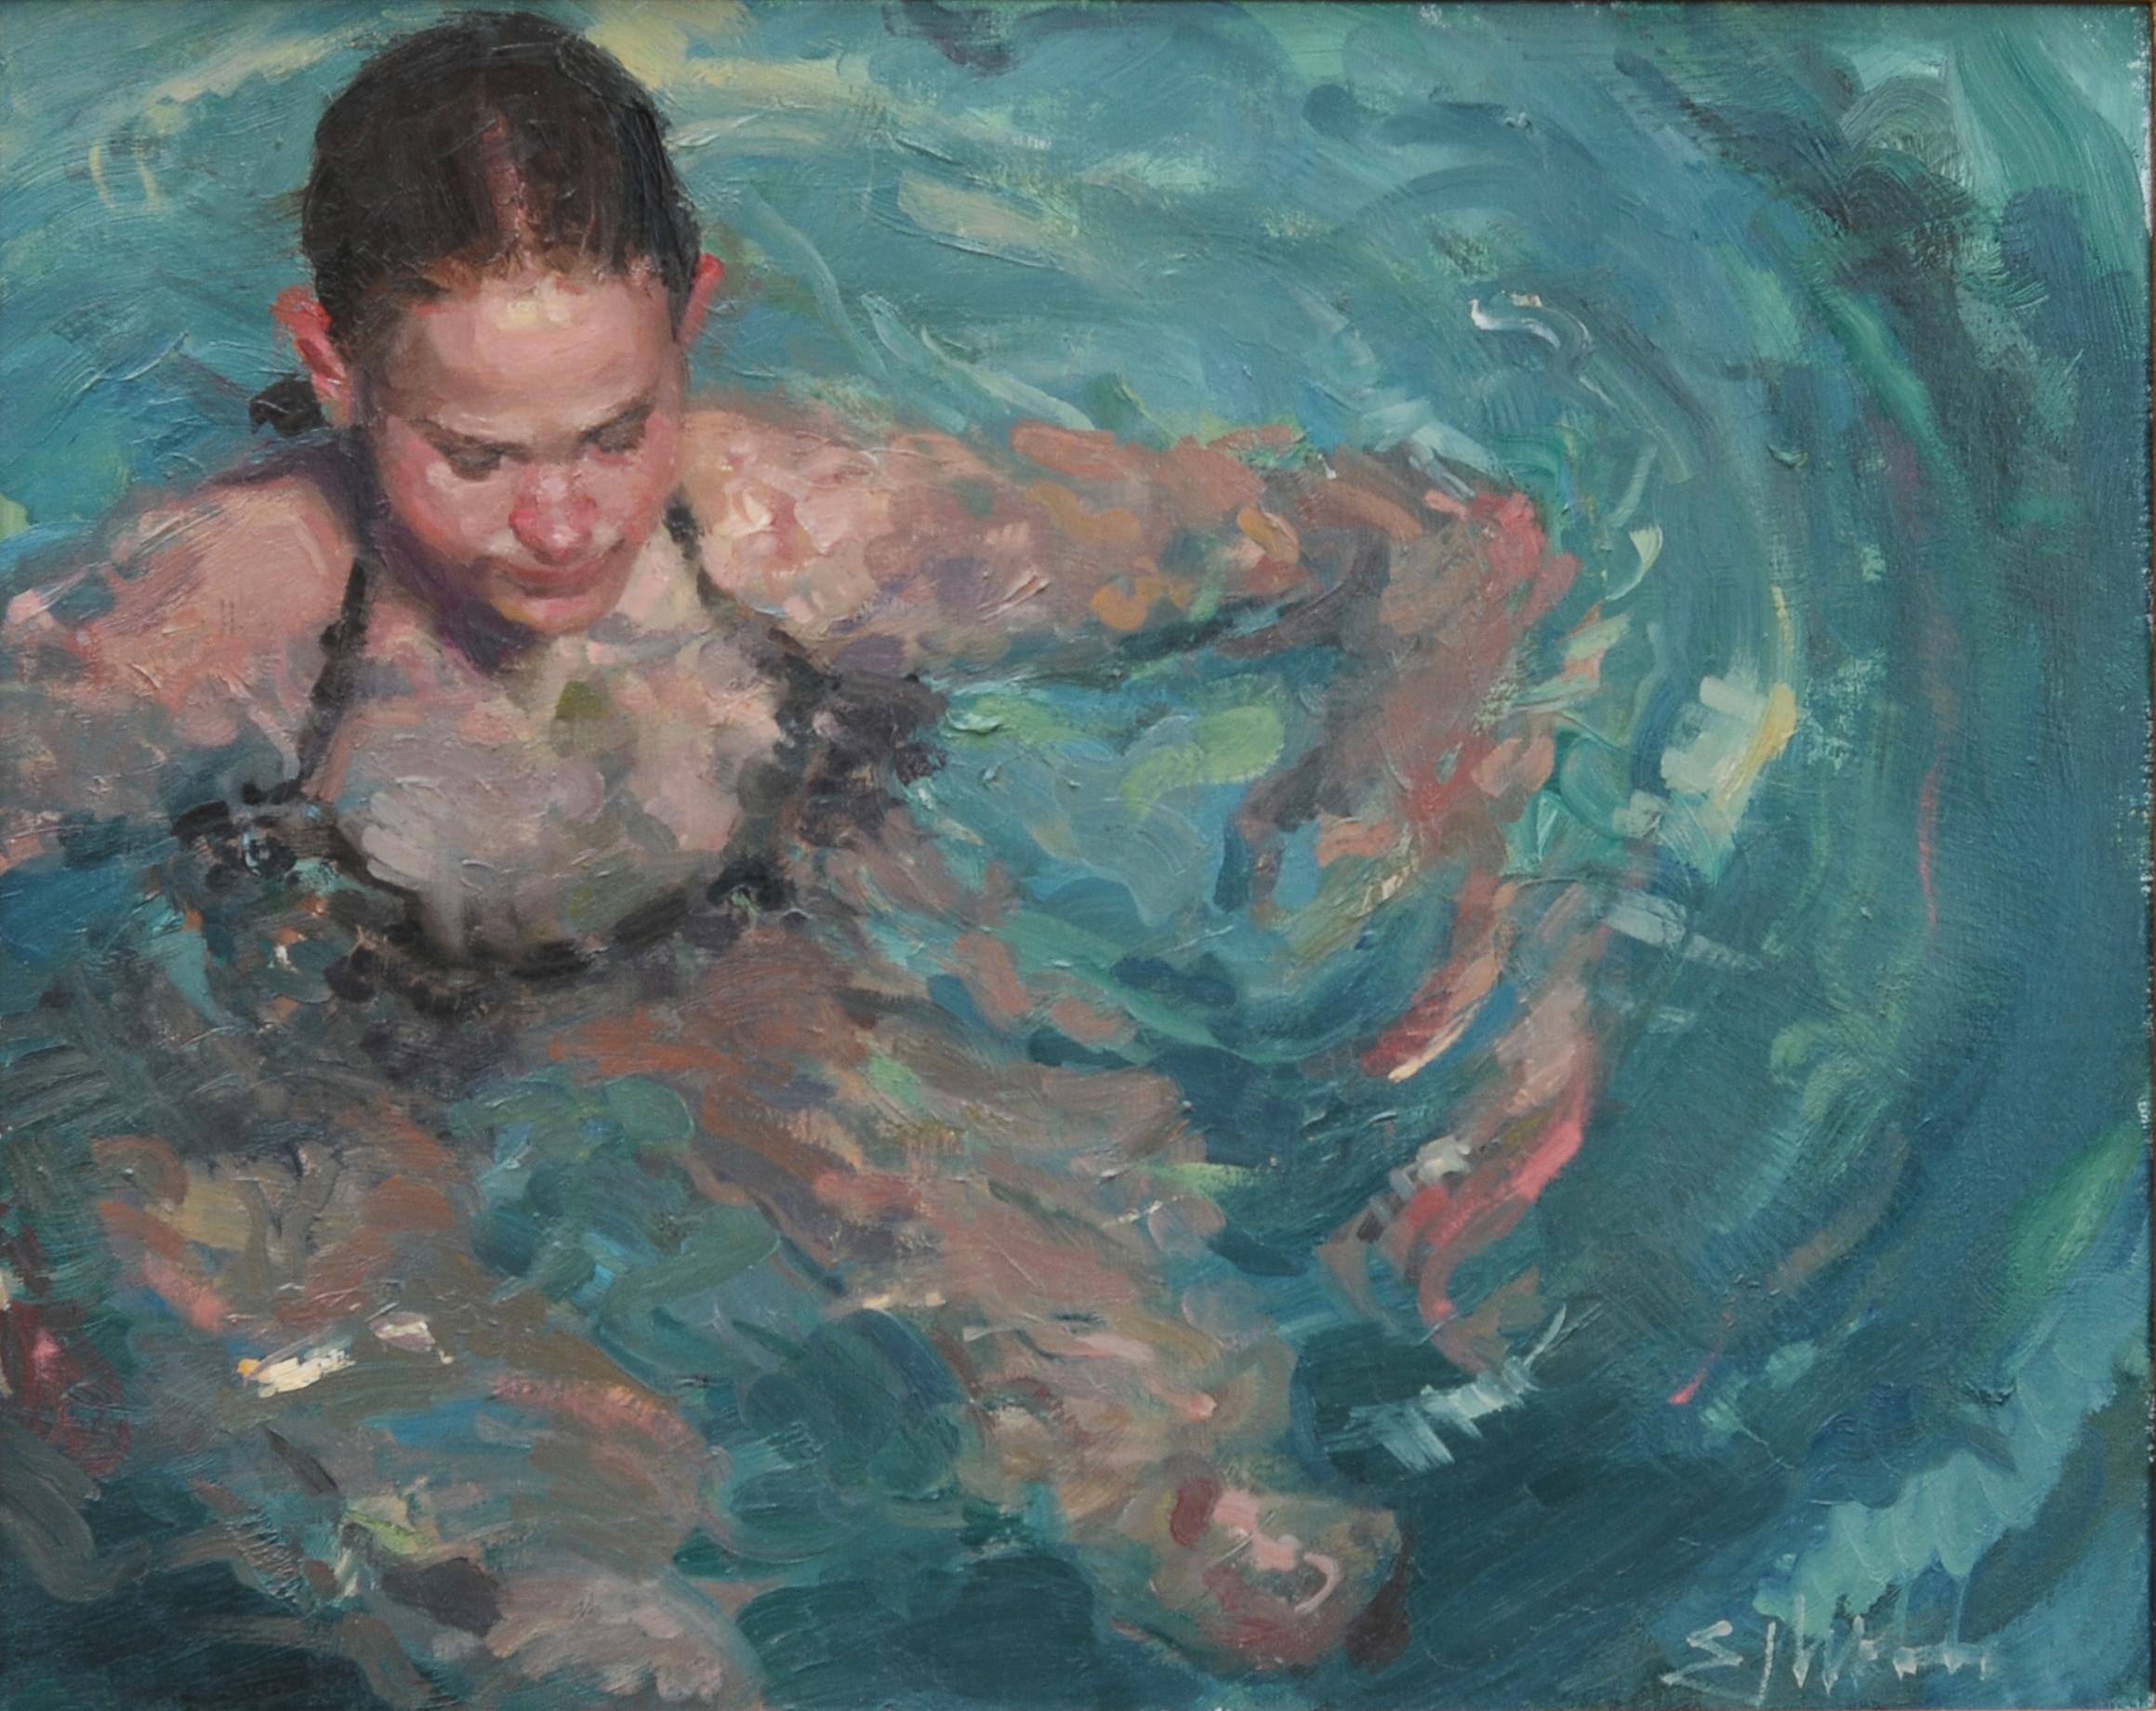 Rock Me Baby  Oil 14 x 20 Framed  Water Movement  Figurative Portraiture  - Painting by E.Melinda Morrison